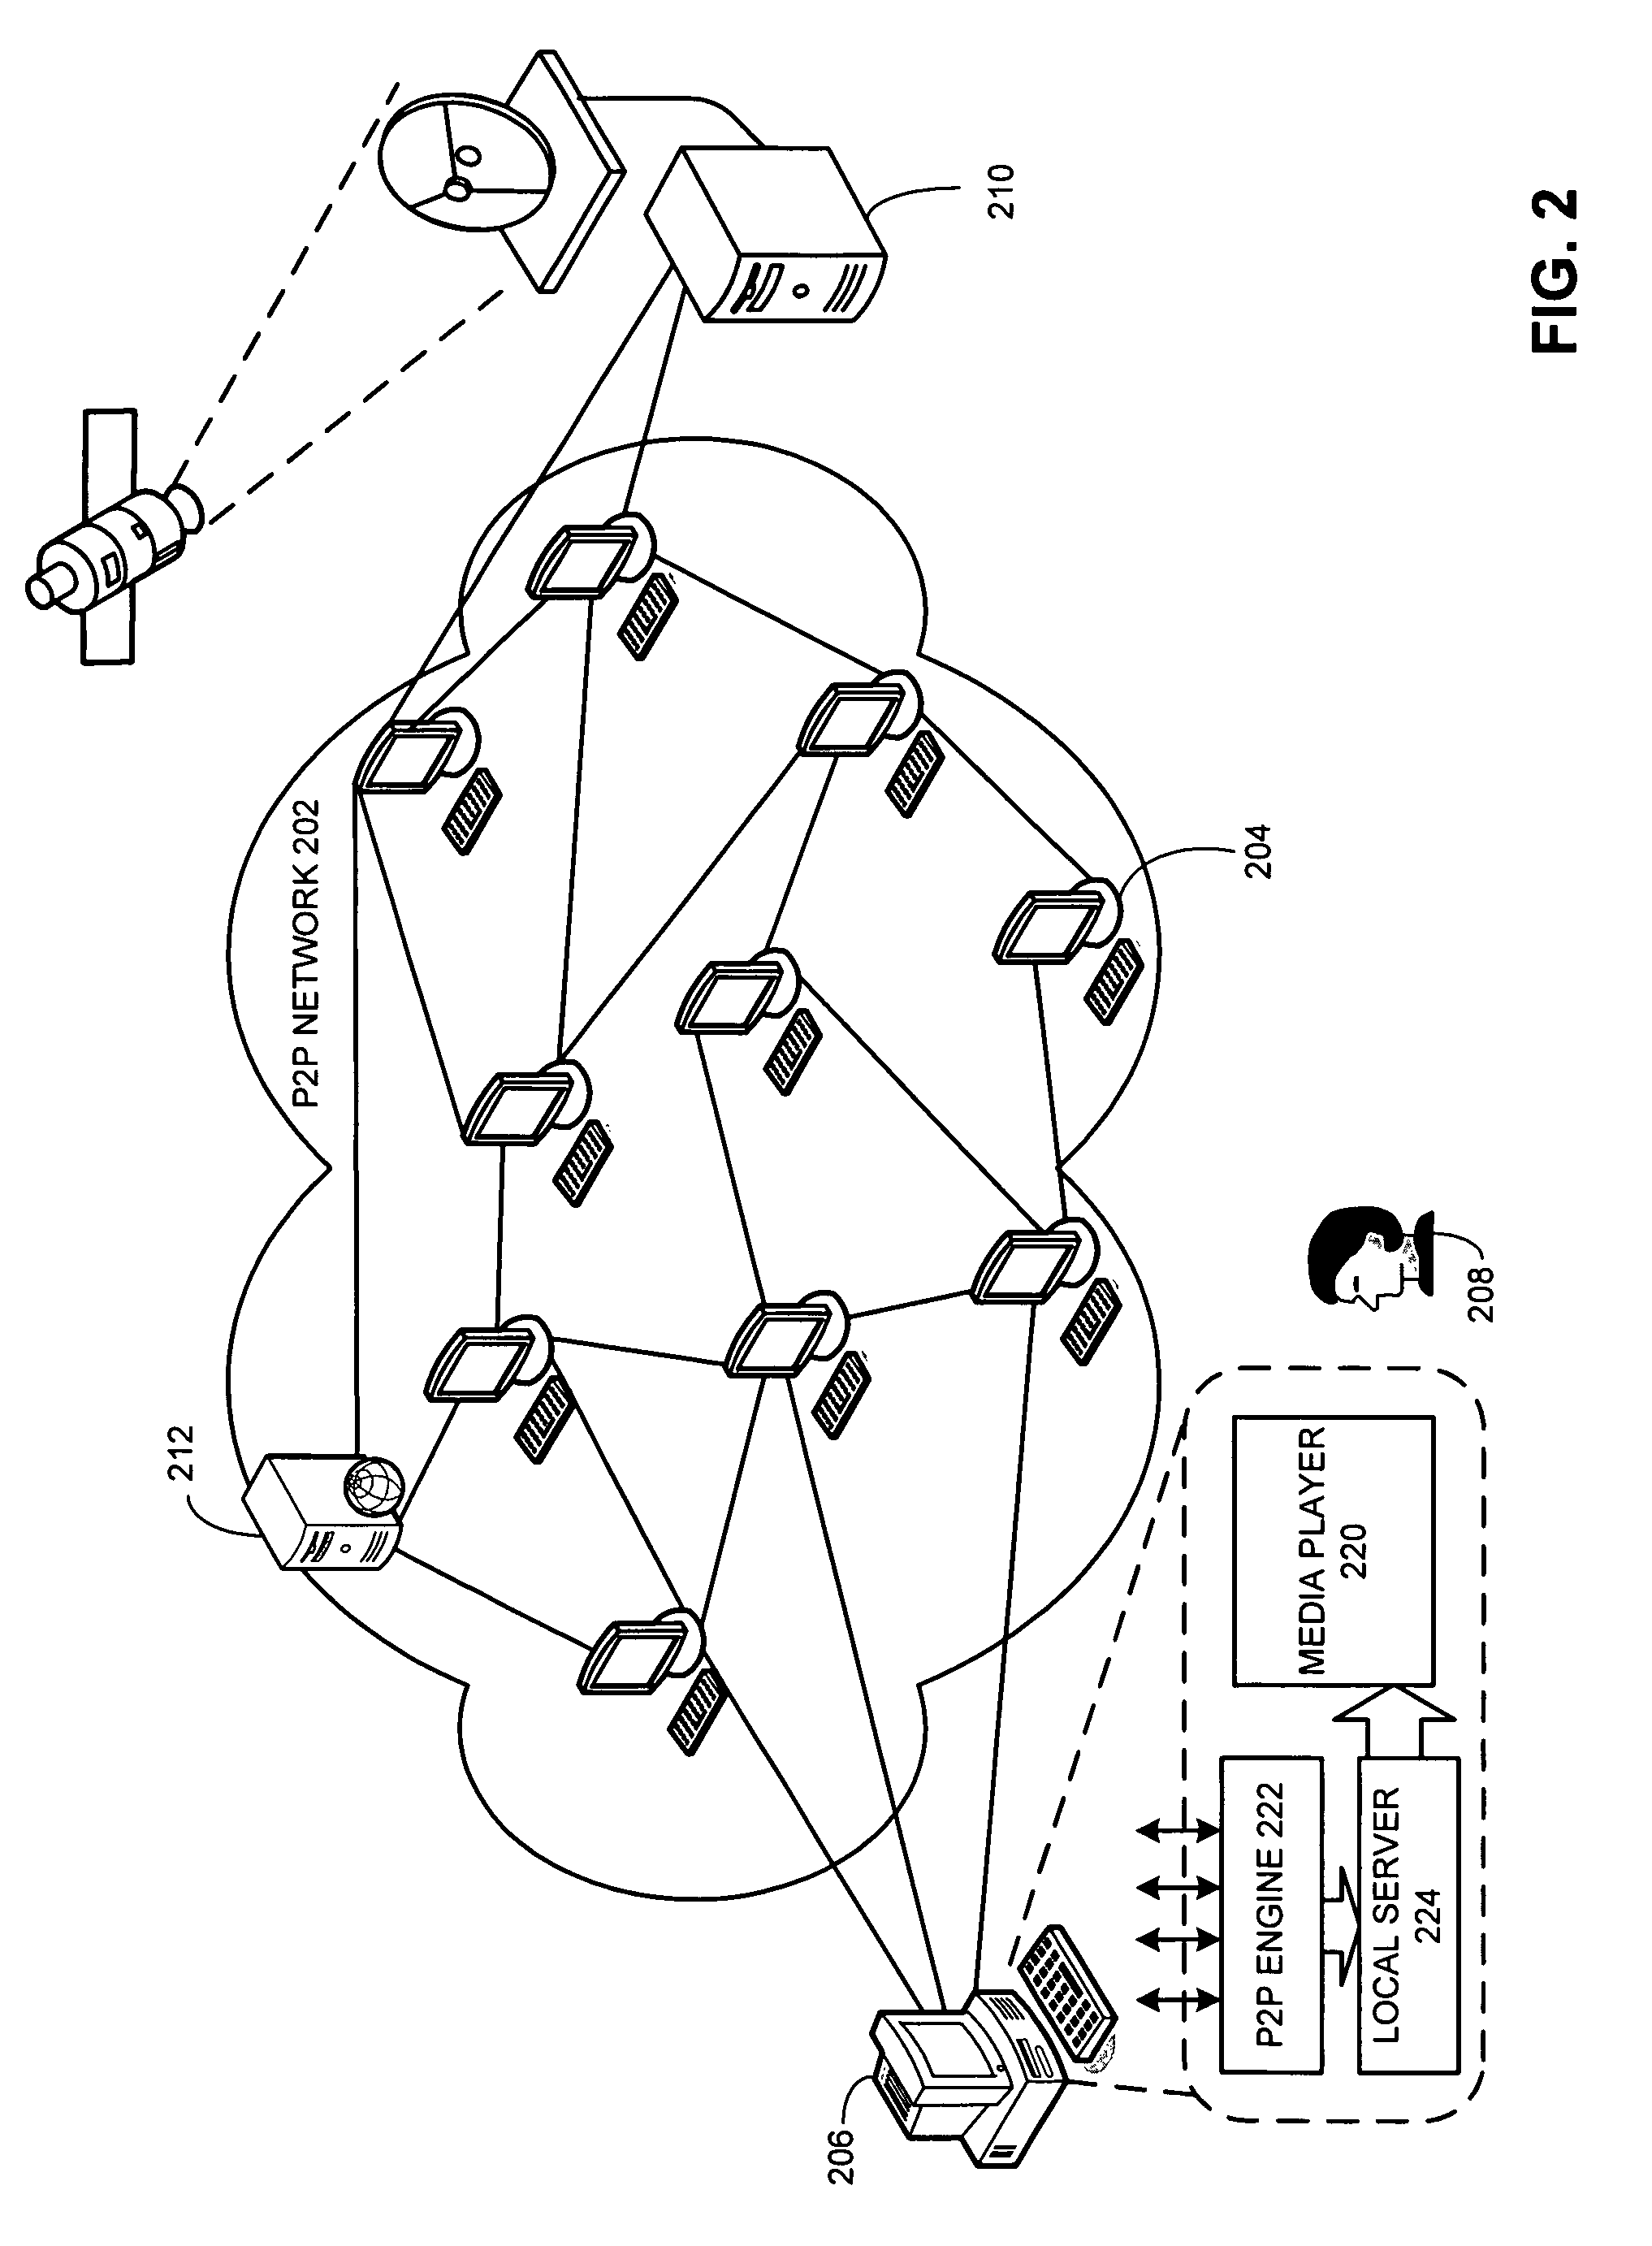 Method and system for expediting peer-to-peer content delivery with improved network utilization